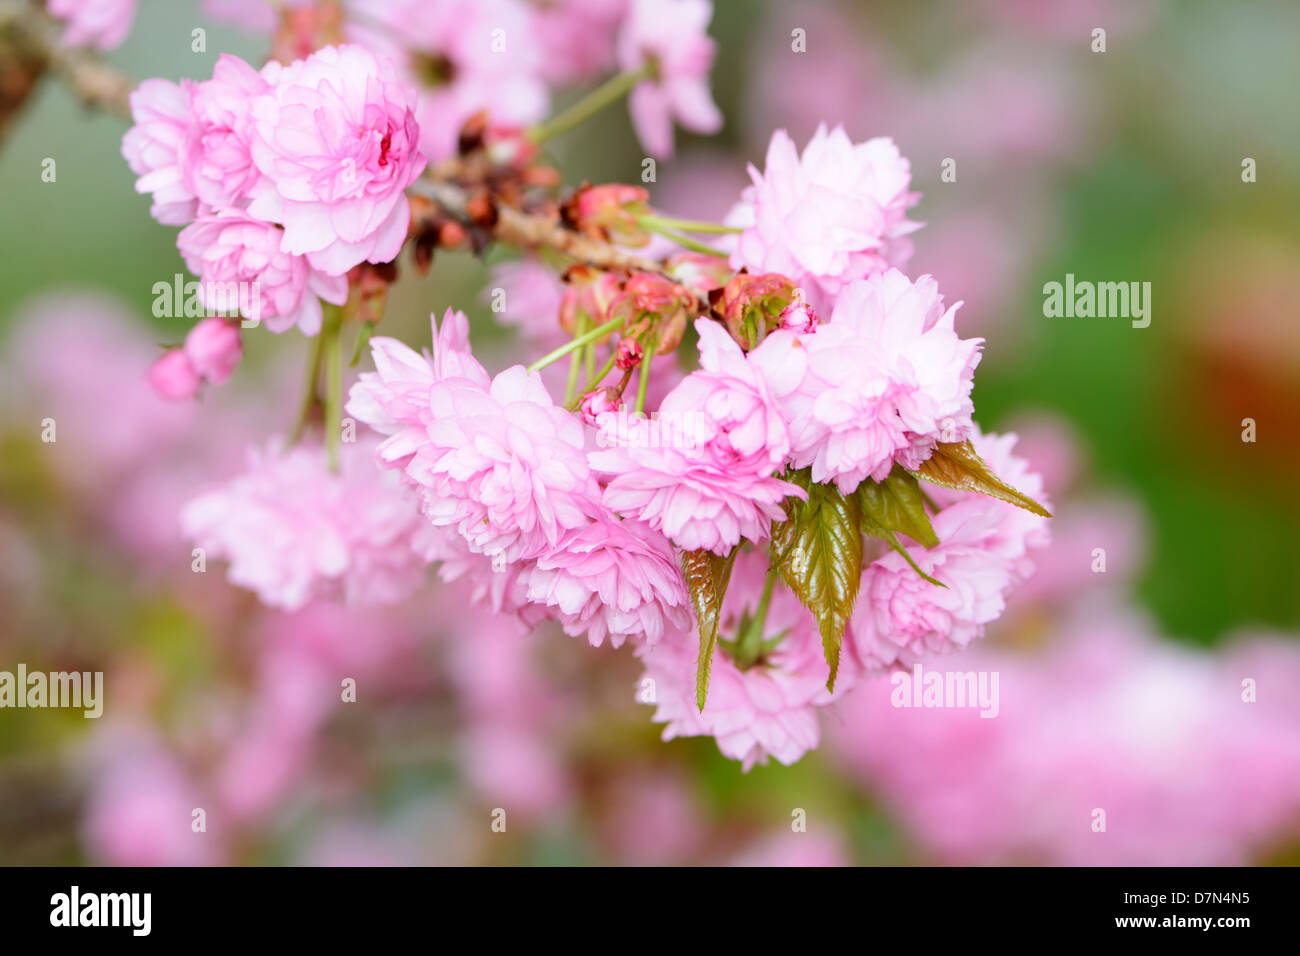 Twig with pink cherry blossoms Stock Photo